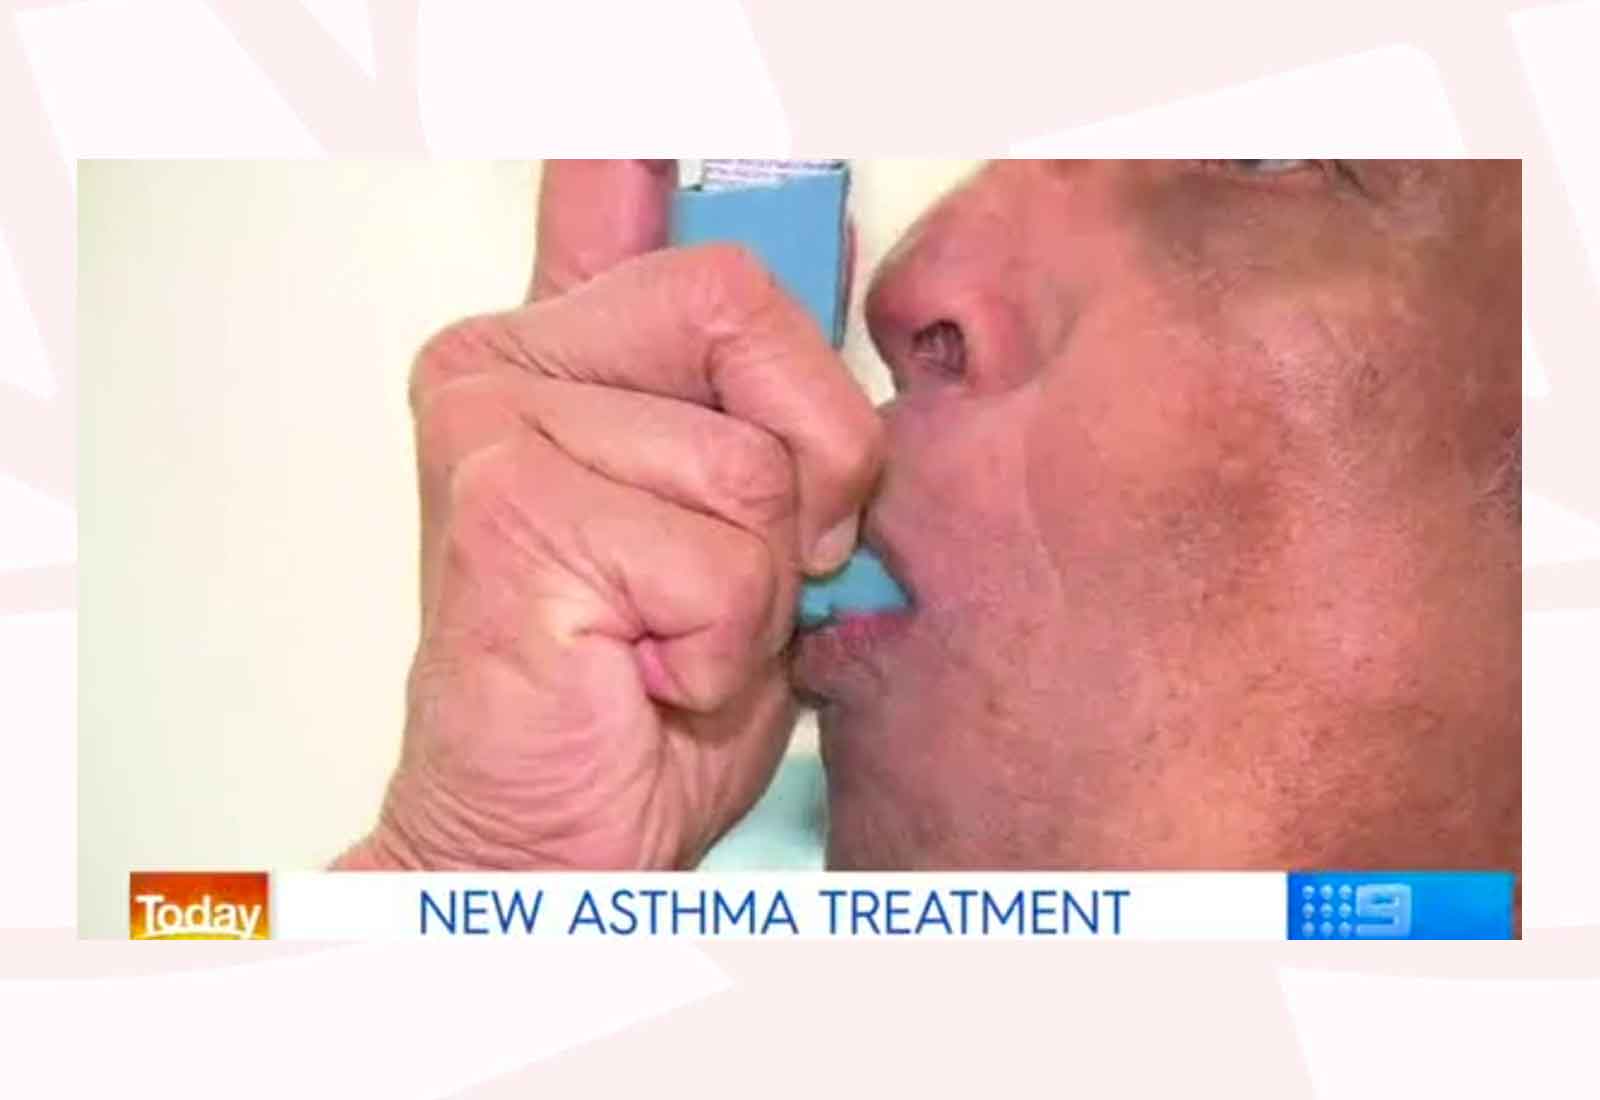 The Today Show: New asthma treatment available for mild sufferers